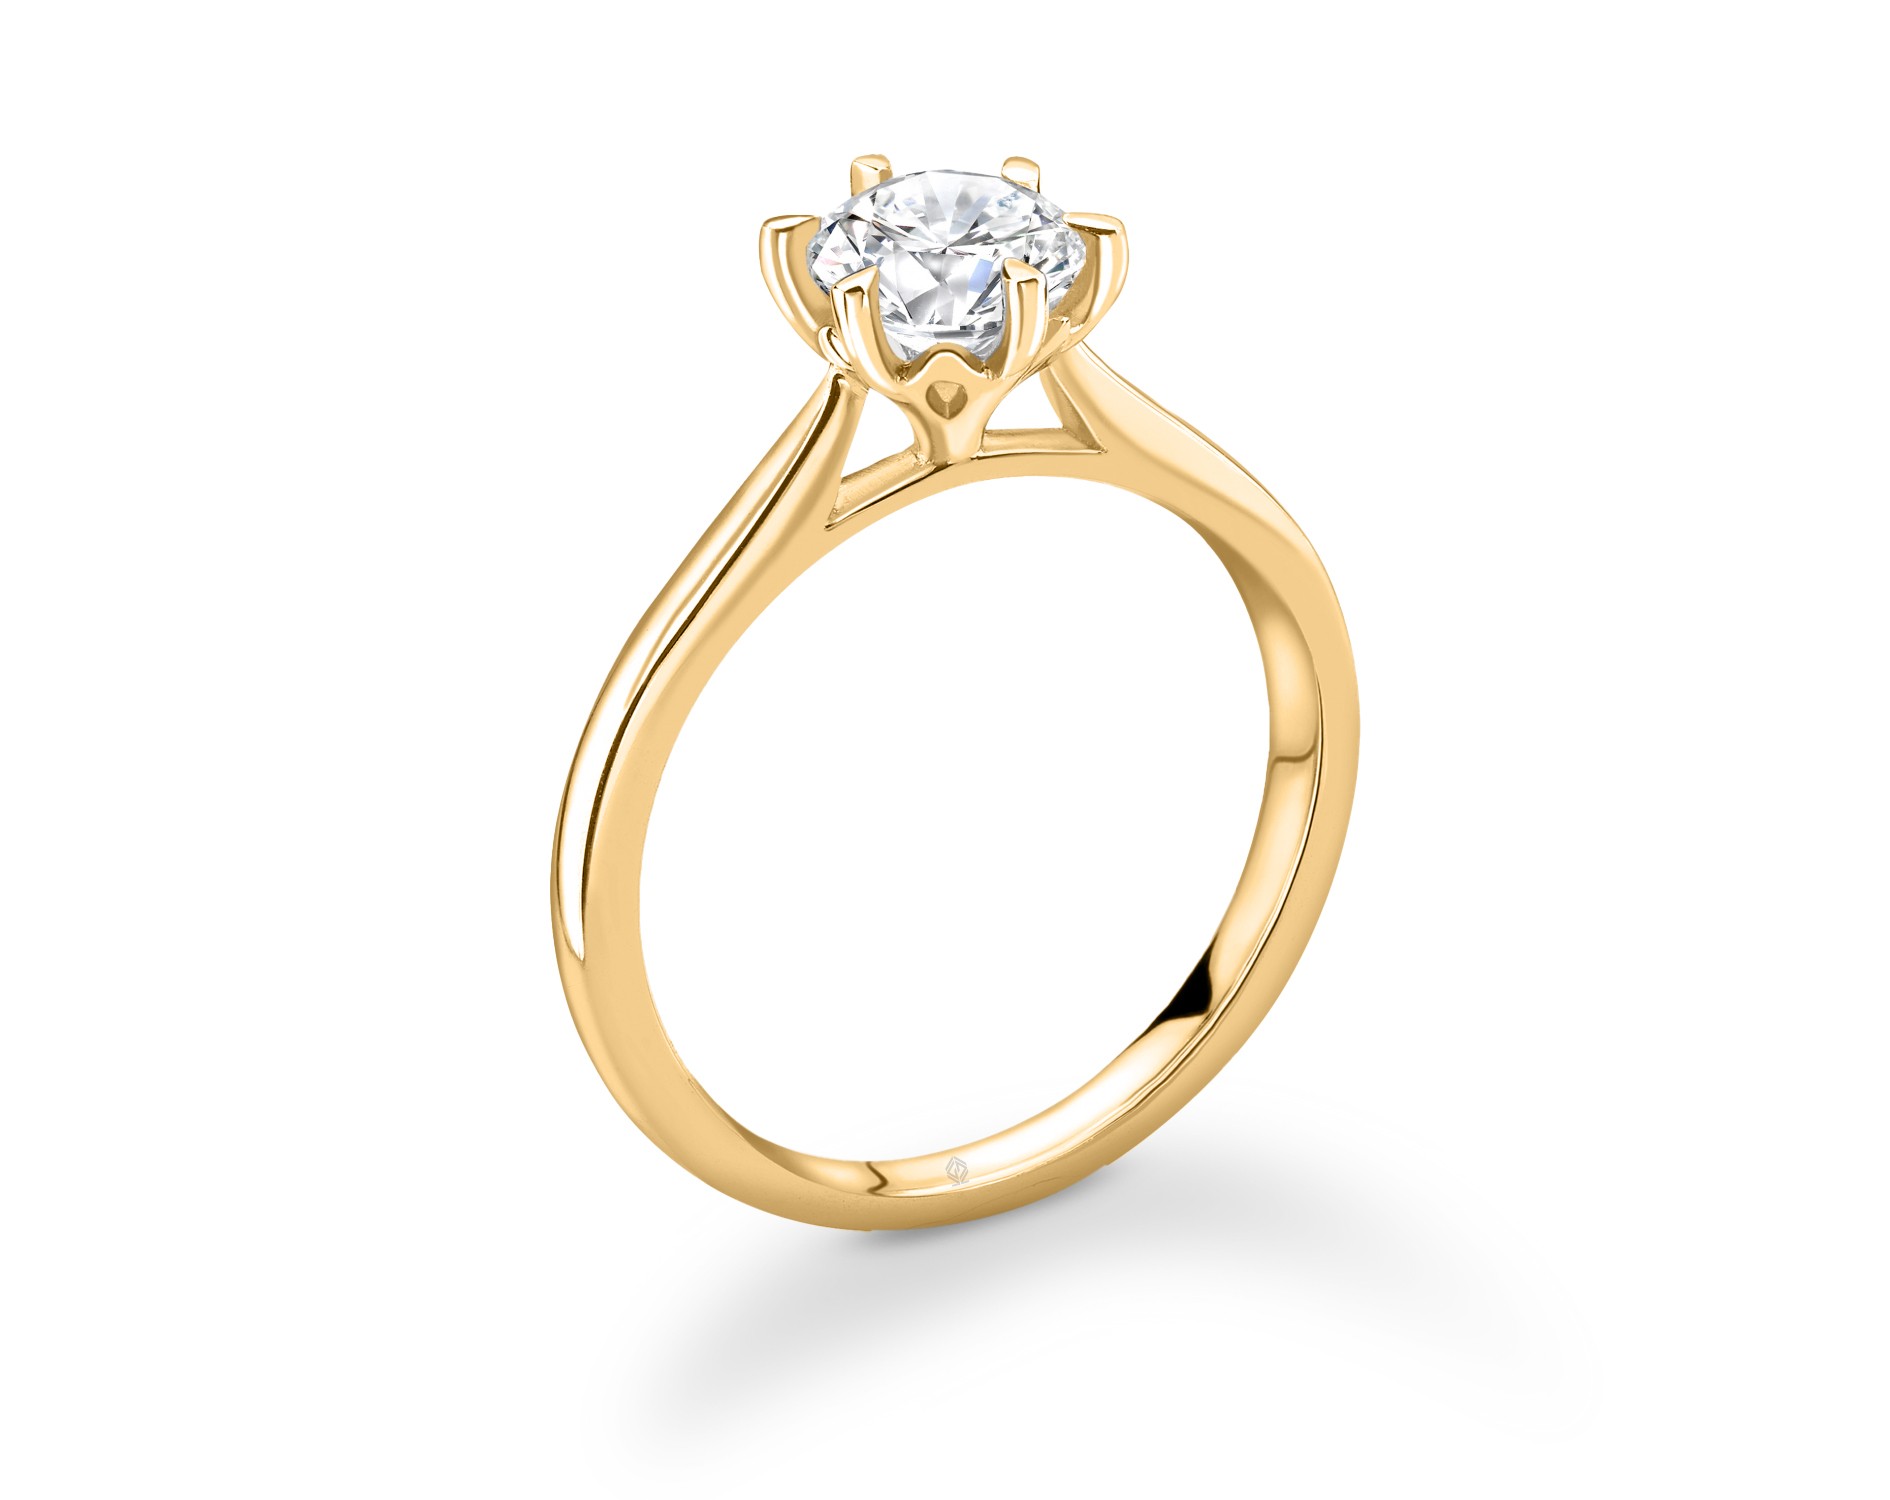 18K YELLOW GOLD ROUND CUT 6 PRONGS SOLITAIRE DIAMOND ENGAGEMENT RING